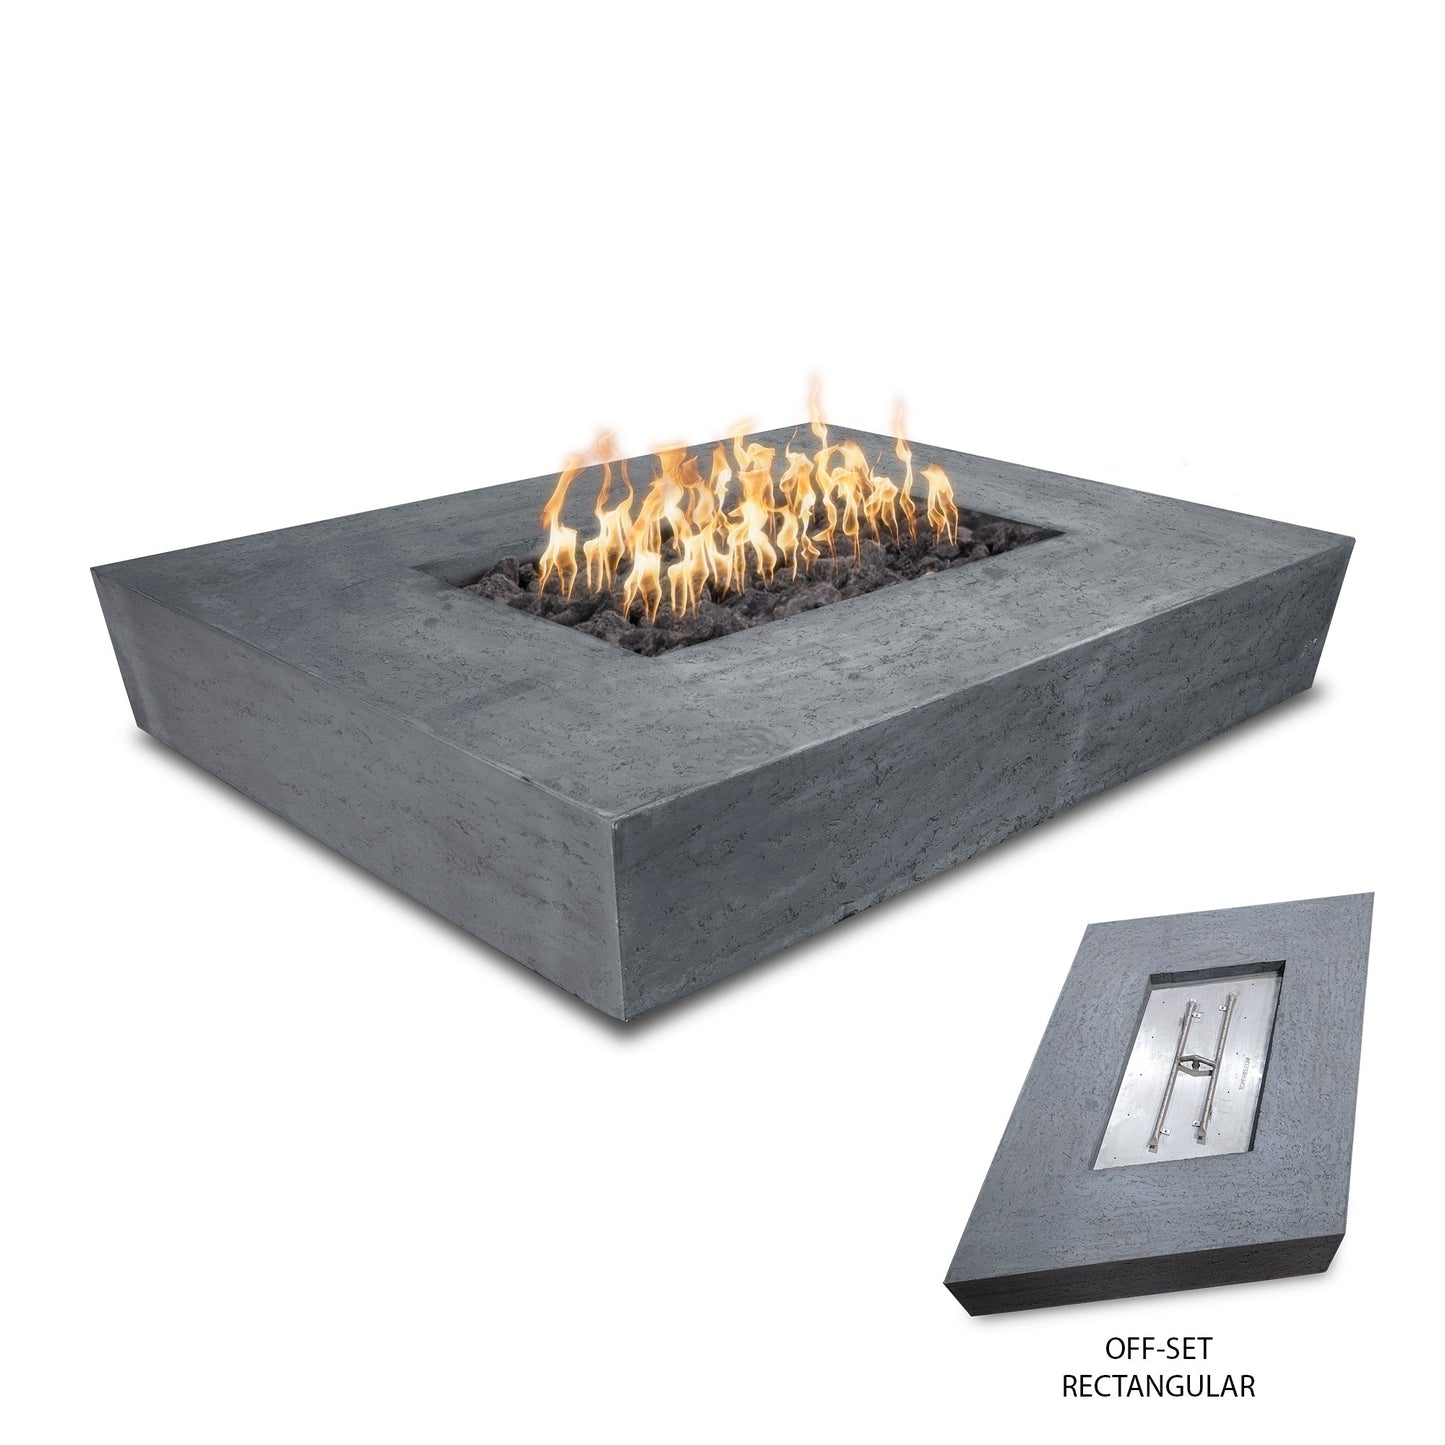 The Outdoor Plus Rectangular Heiko 58" Metallic Copper GFRC Concrete Liquid Propane Fire Pit with Match Lit with Flame Sense Ignition